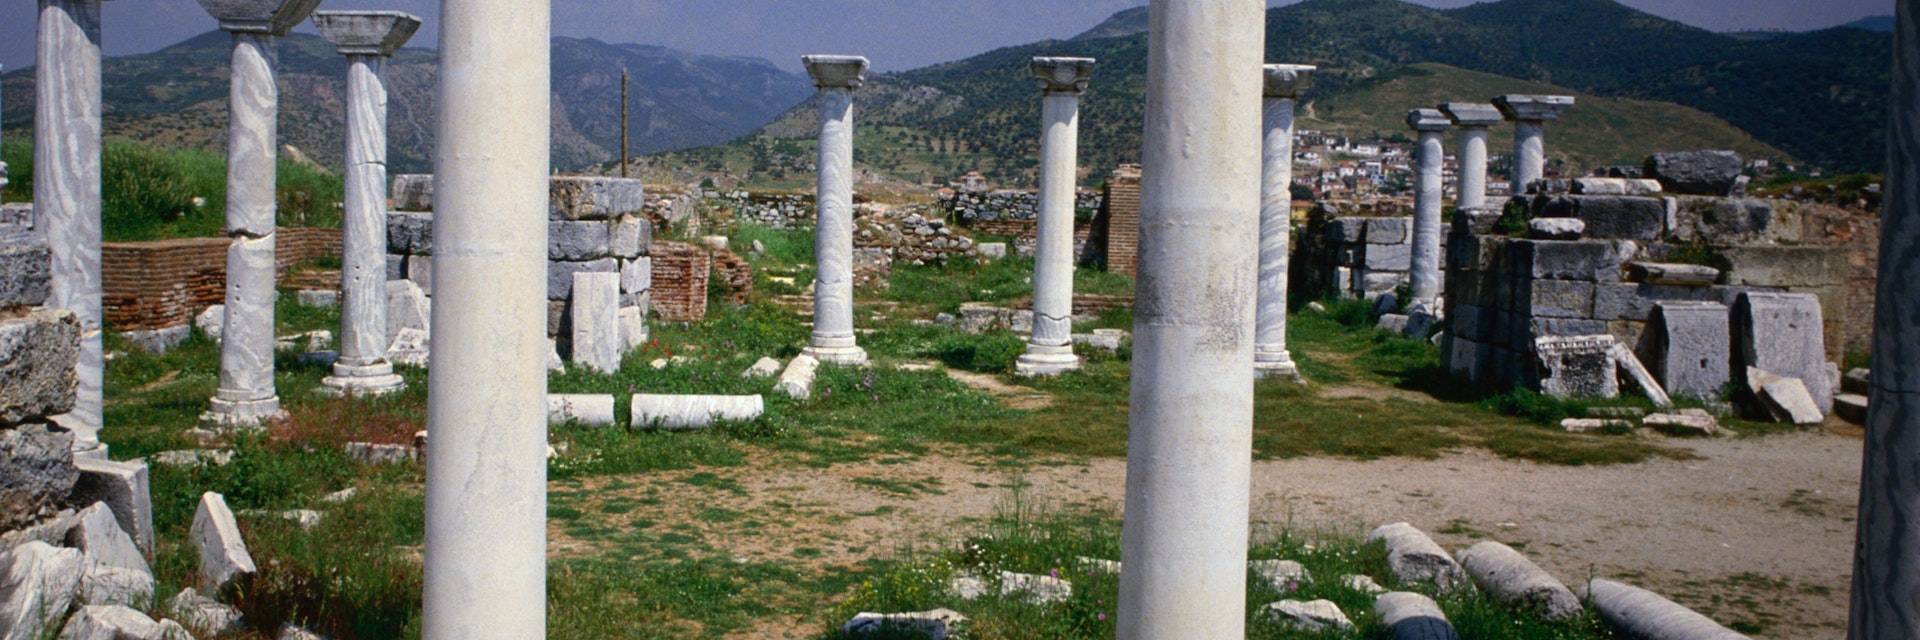 The Temple of St John in the Roman ruins of ancient Ephesus, the city was a great trading and religious city and a centre for the cult of Cybele, the Anatolian fertility goddess